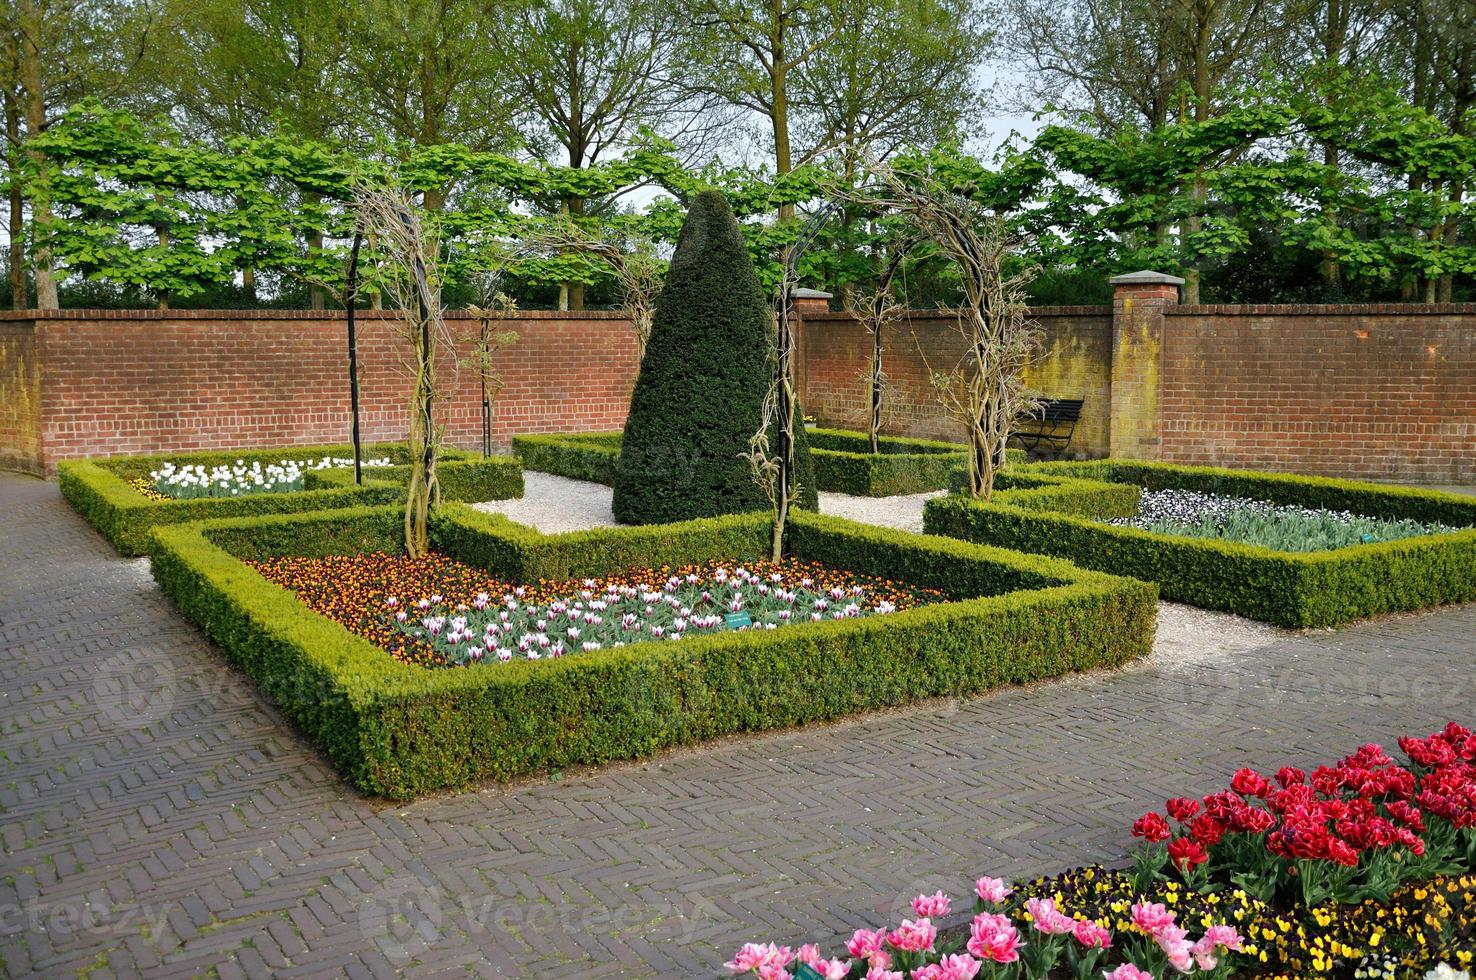 Garden with small bushes, white, orange and red tulips and brick walls in Keukenhof park in Holland photo